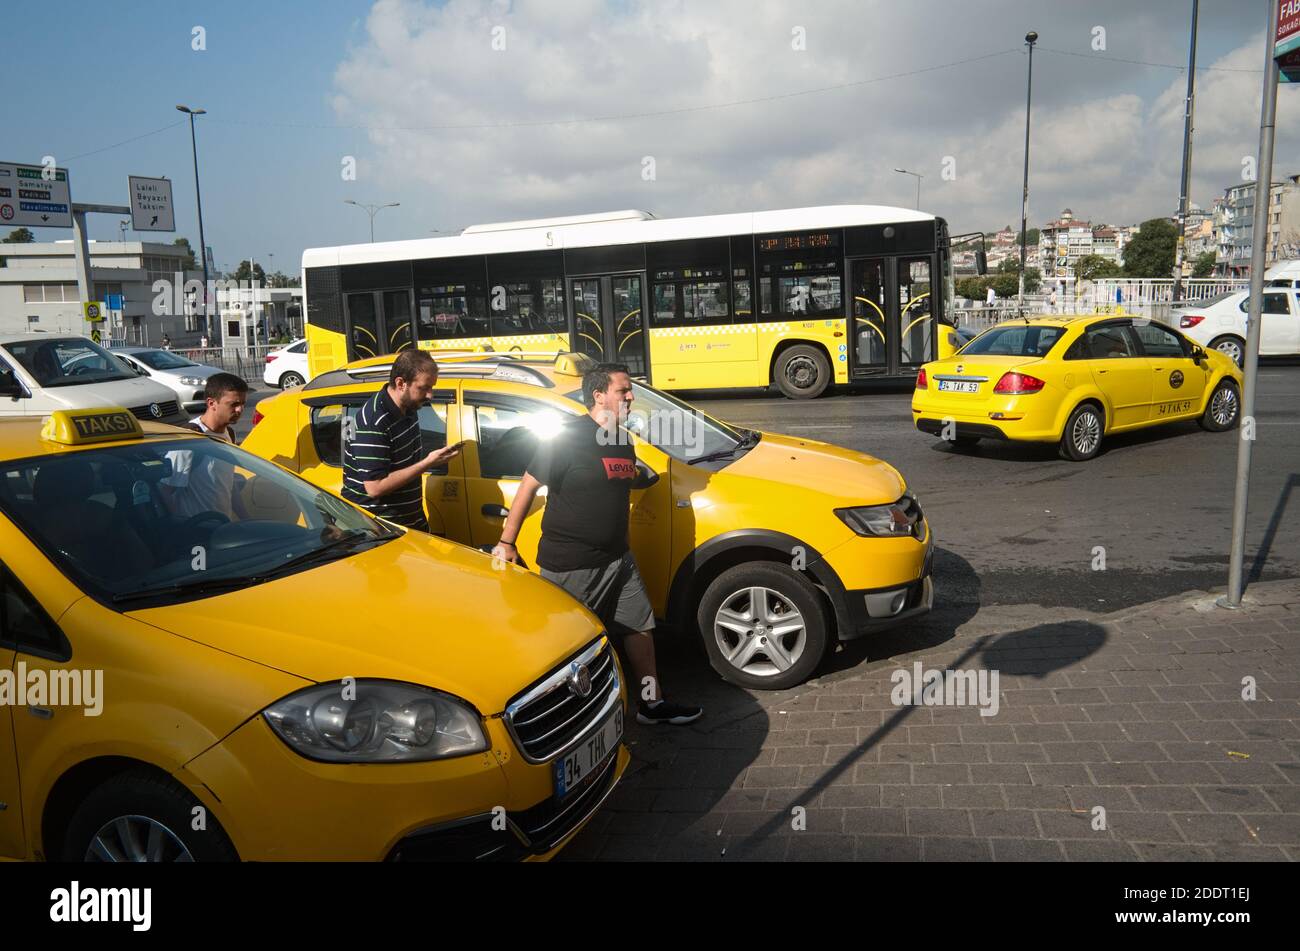 Istanbul, Turkey - September, 2018: Three young men crossing road near yellow taxi cars on the street in Istanbul. Mostly bright yellow color picture. Stock Photo